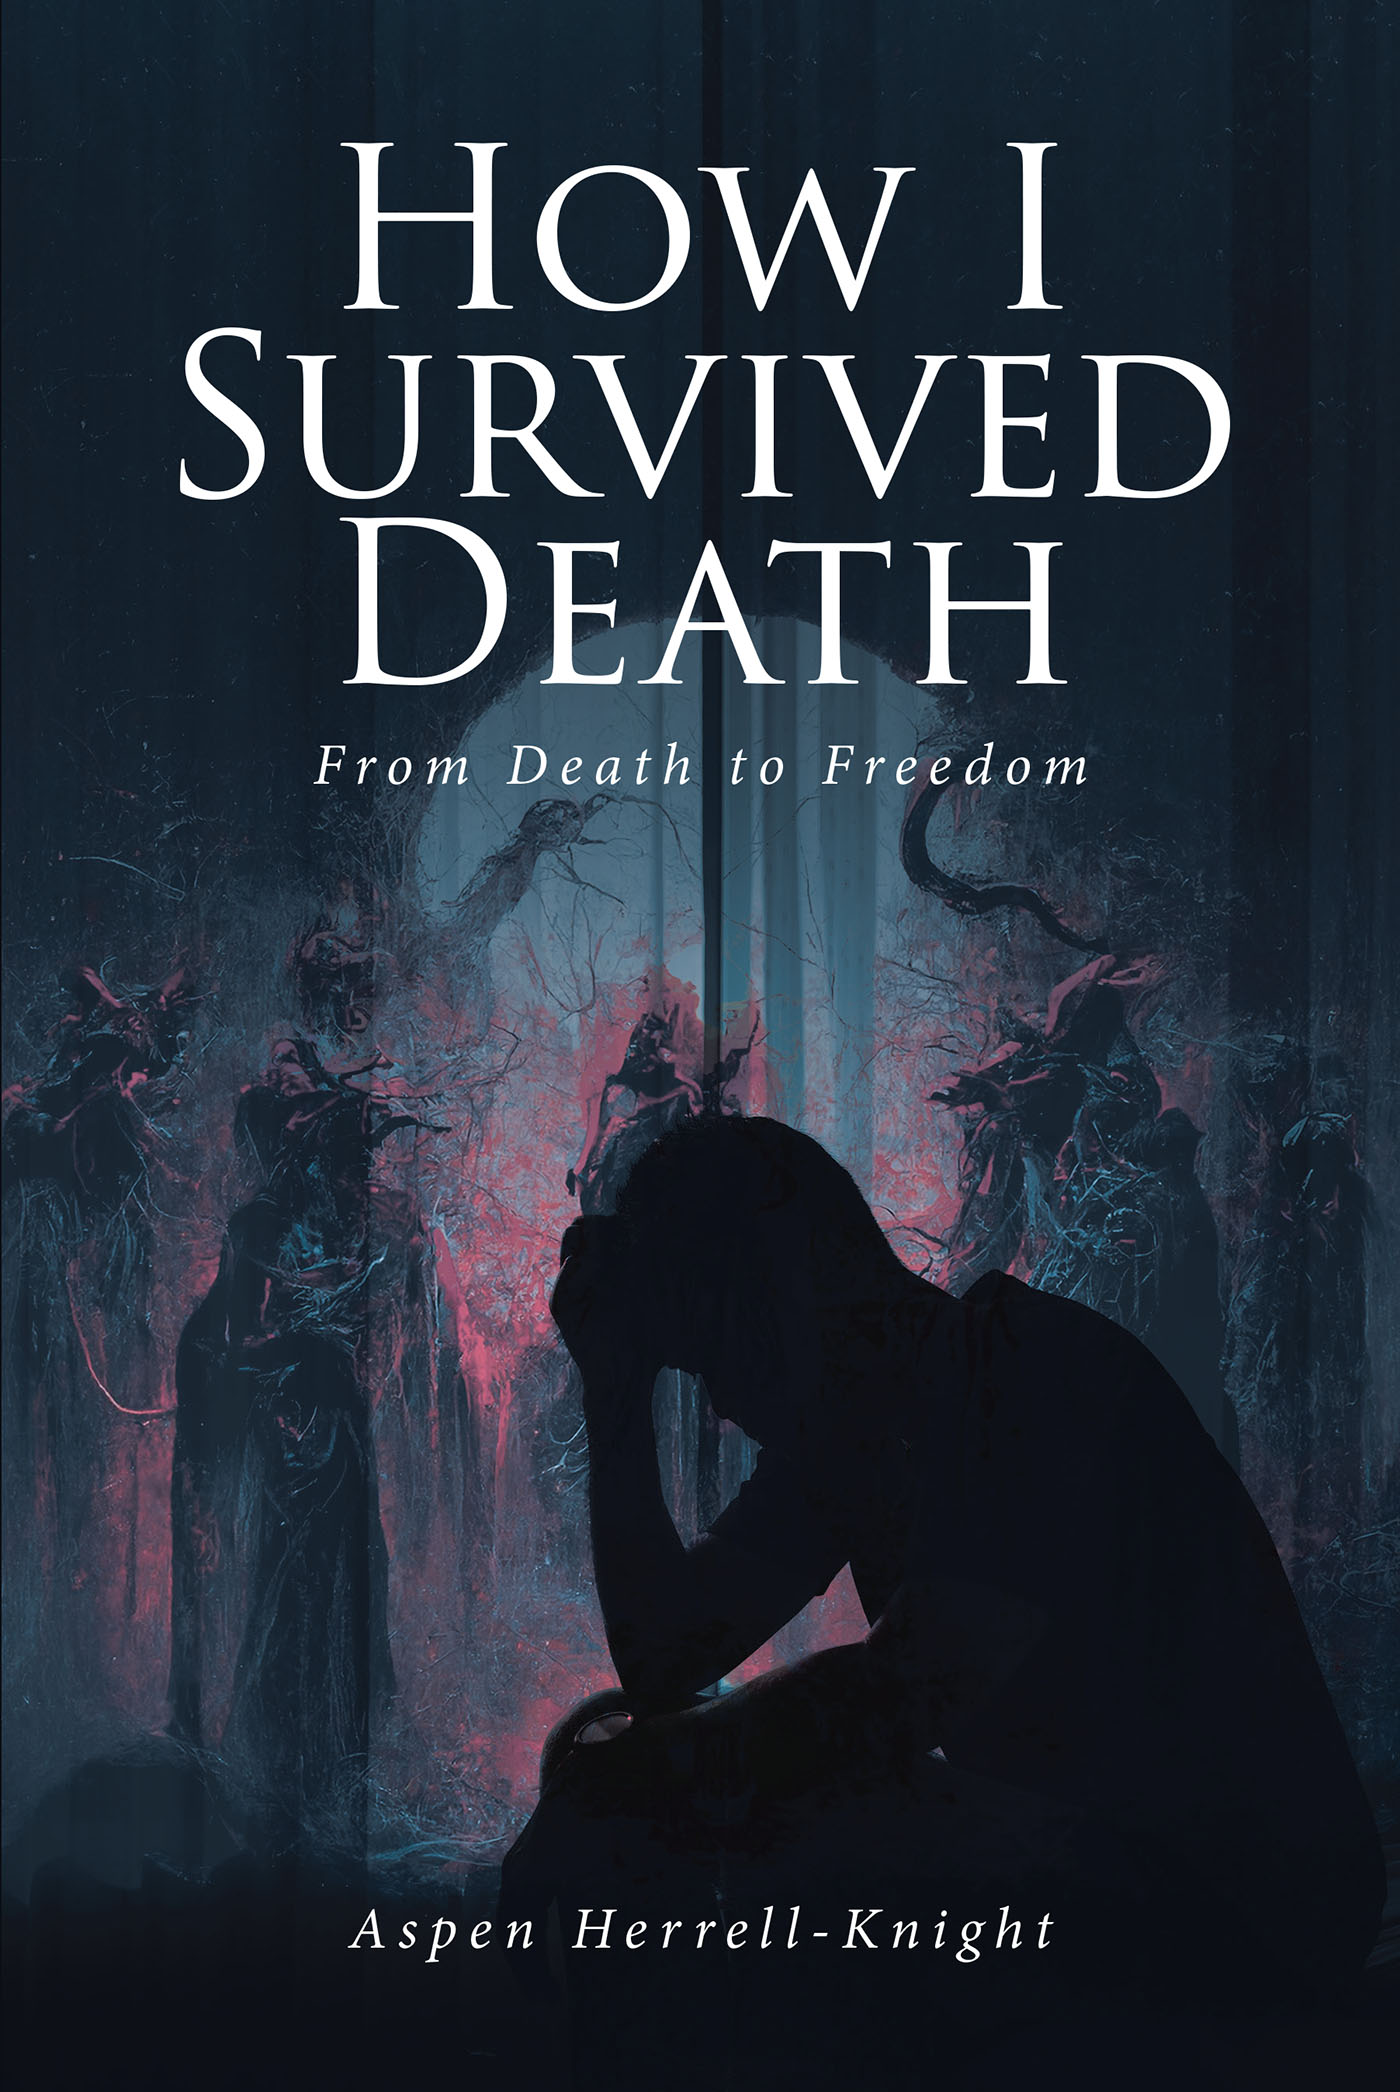 Aspen Herrell-Knight’s Newly Released “How I Survived Death: From Death to Freedom” is a Powerful Testimony That Shares a Message of Encouragement